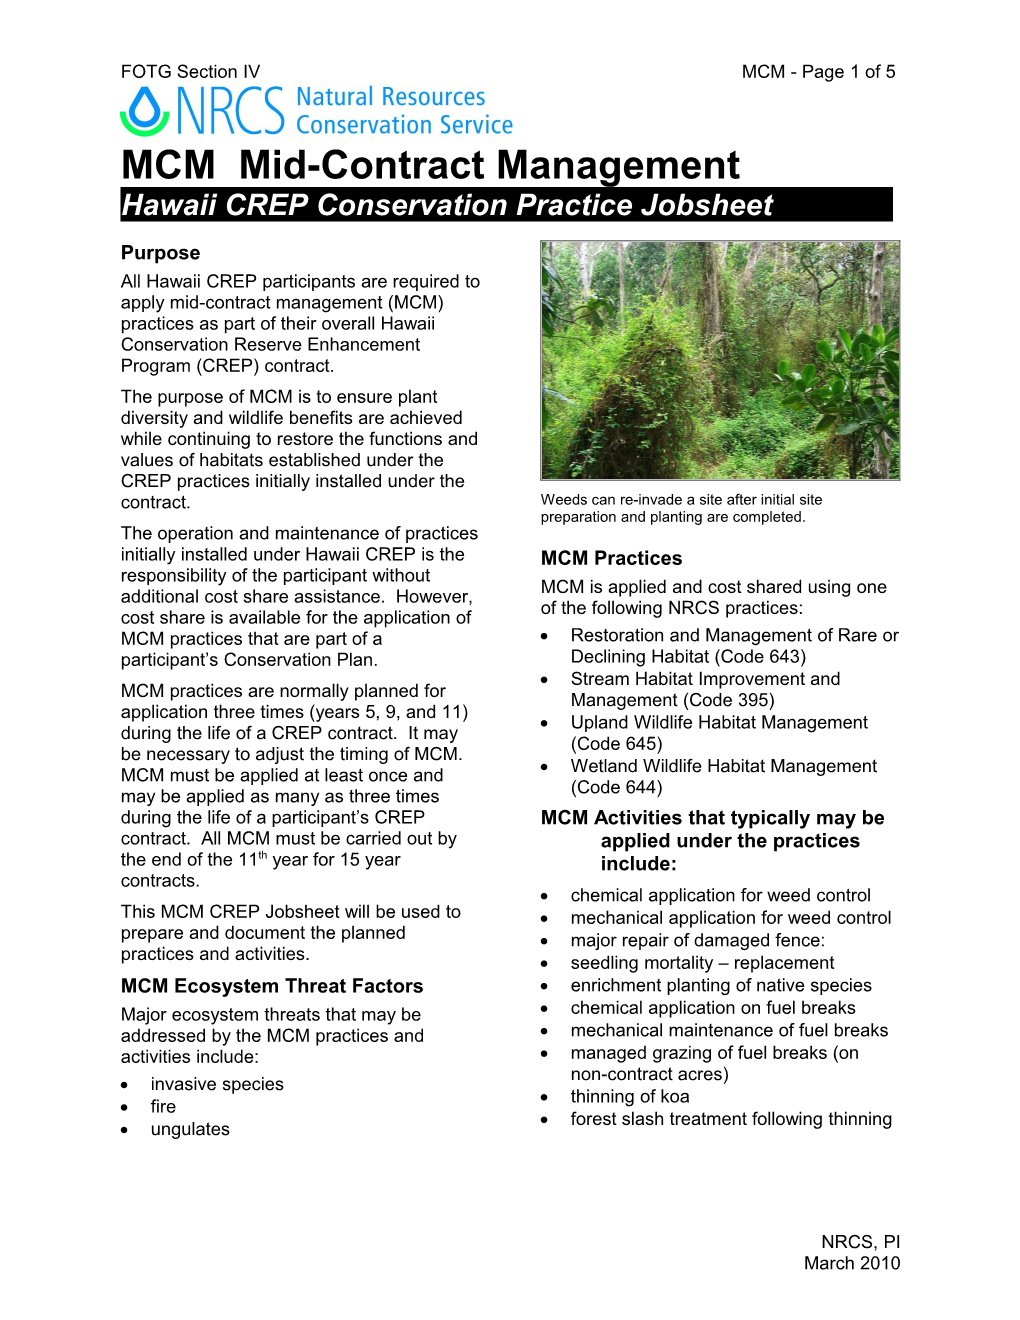 MCM Mid-Contract Management